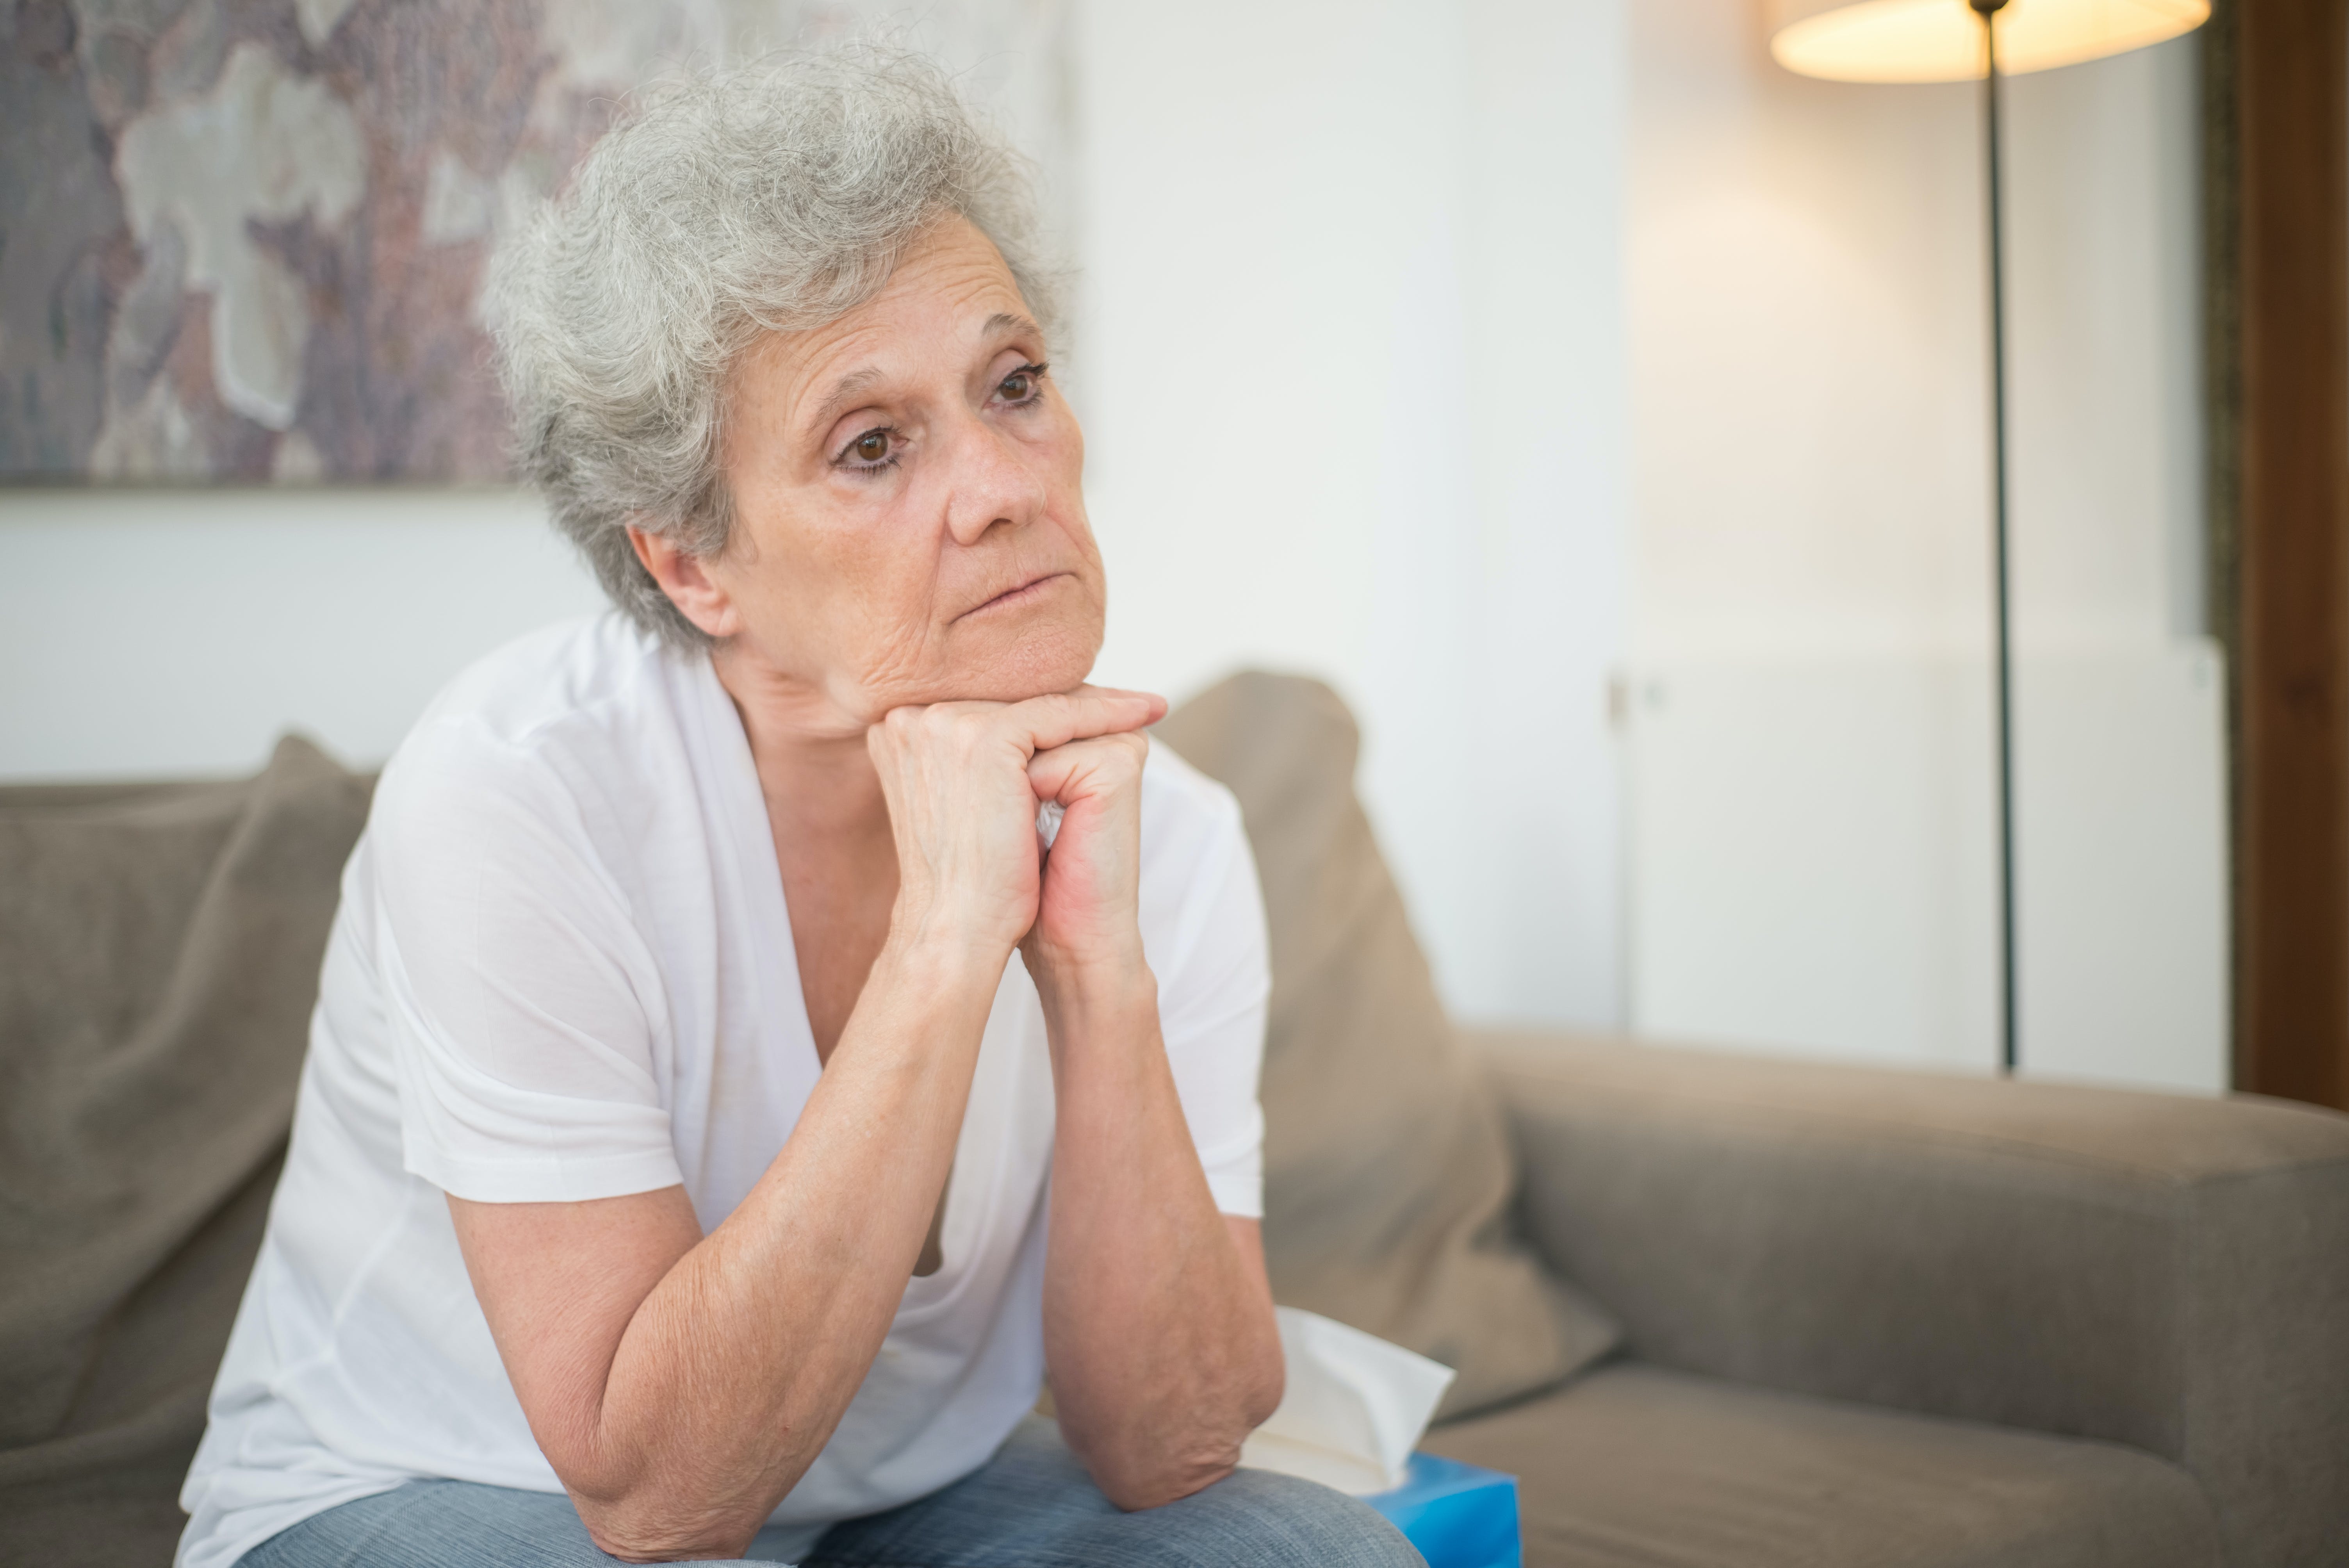 An upset older woman sitting with her hands under her chin | Source: Pexels